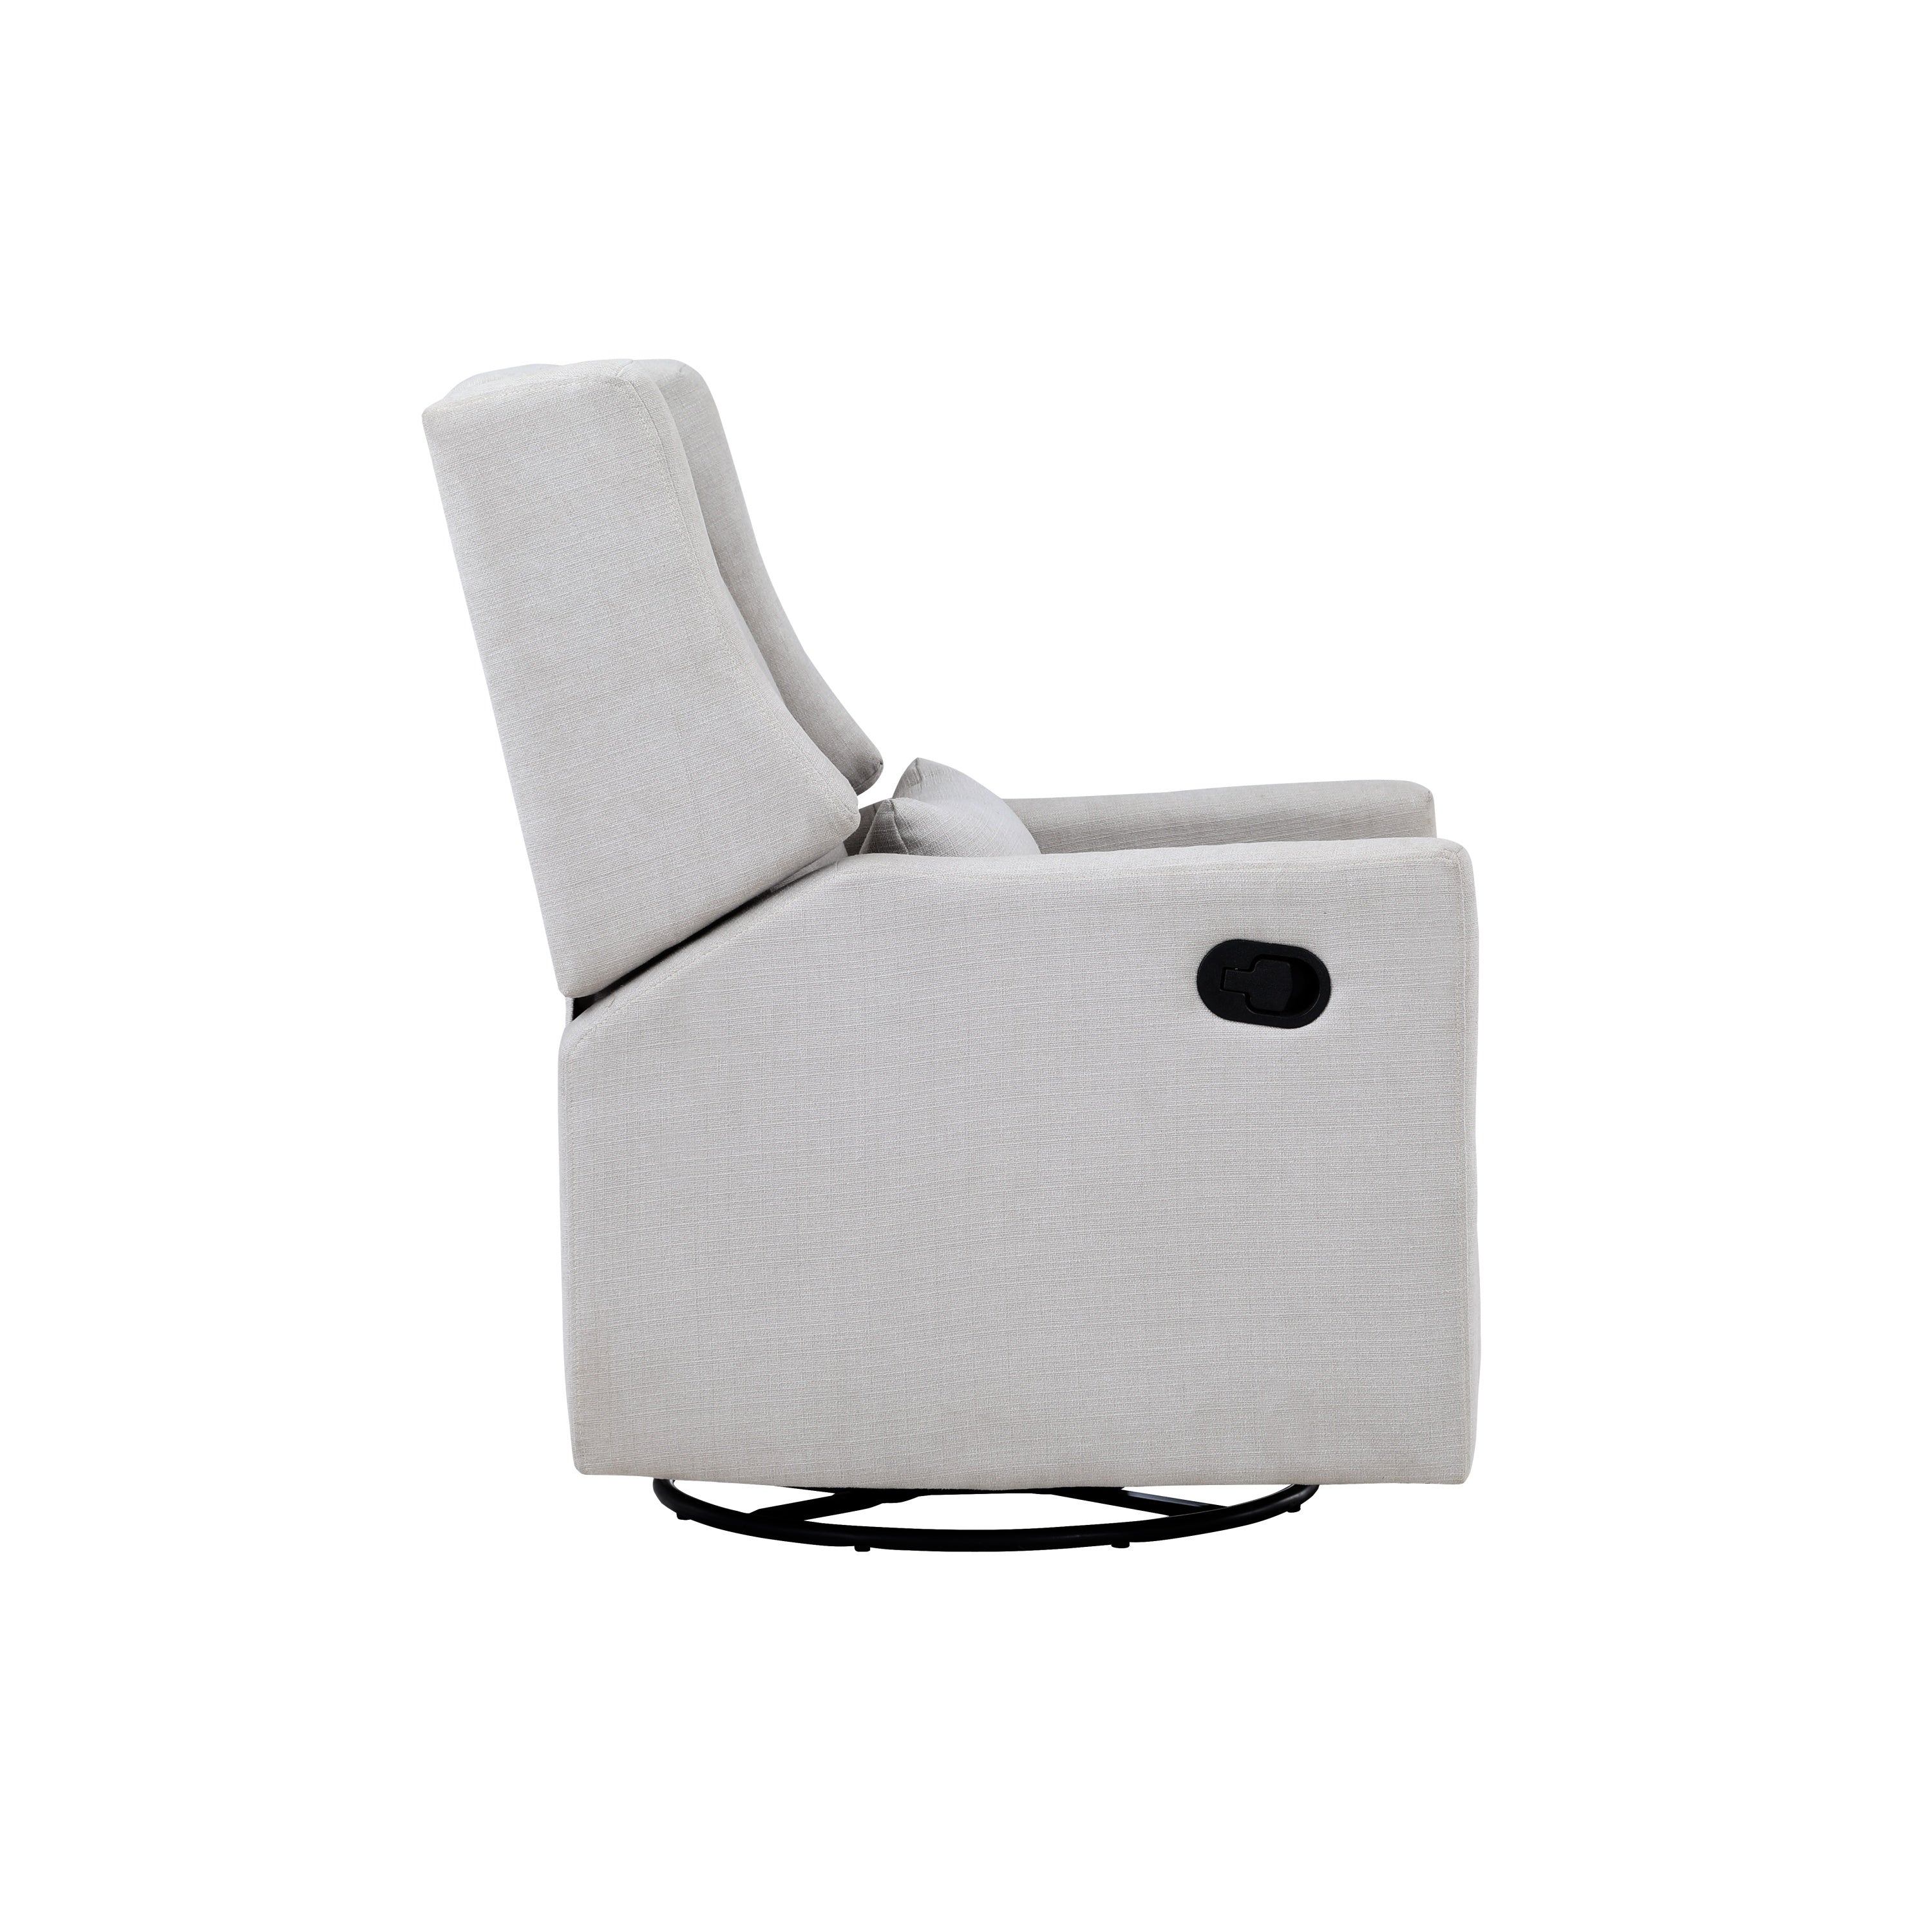 Swivel Glider Recliner with Pillow Blanco Fabric